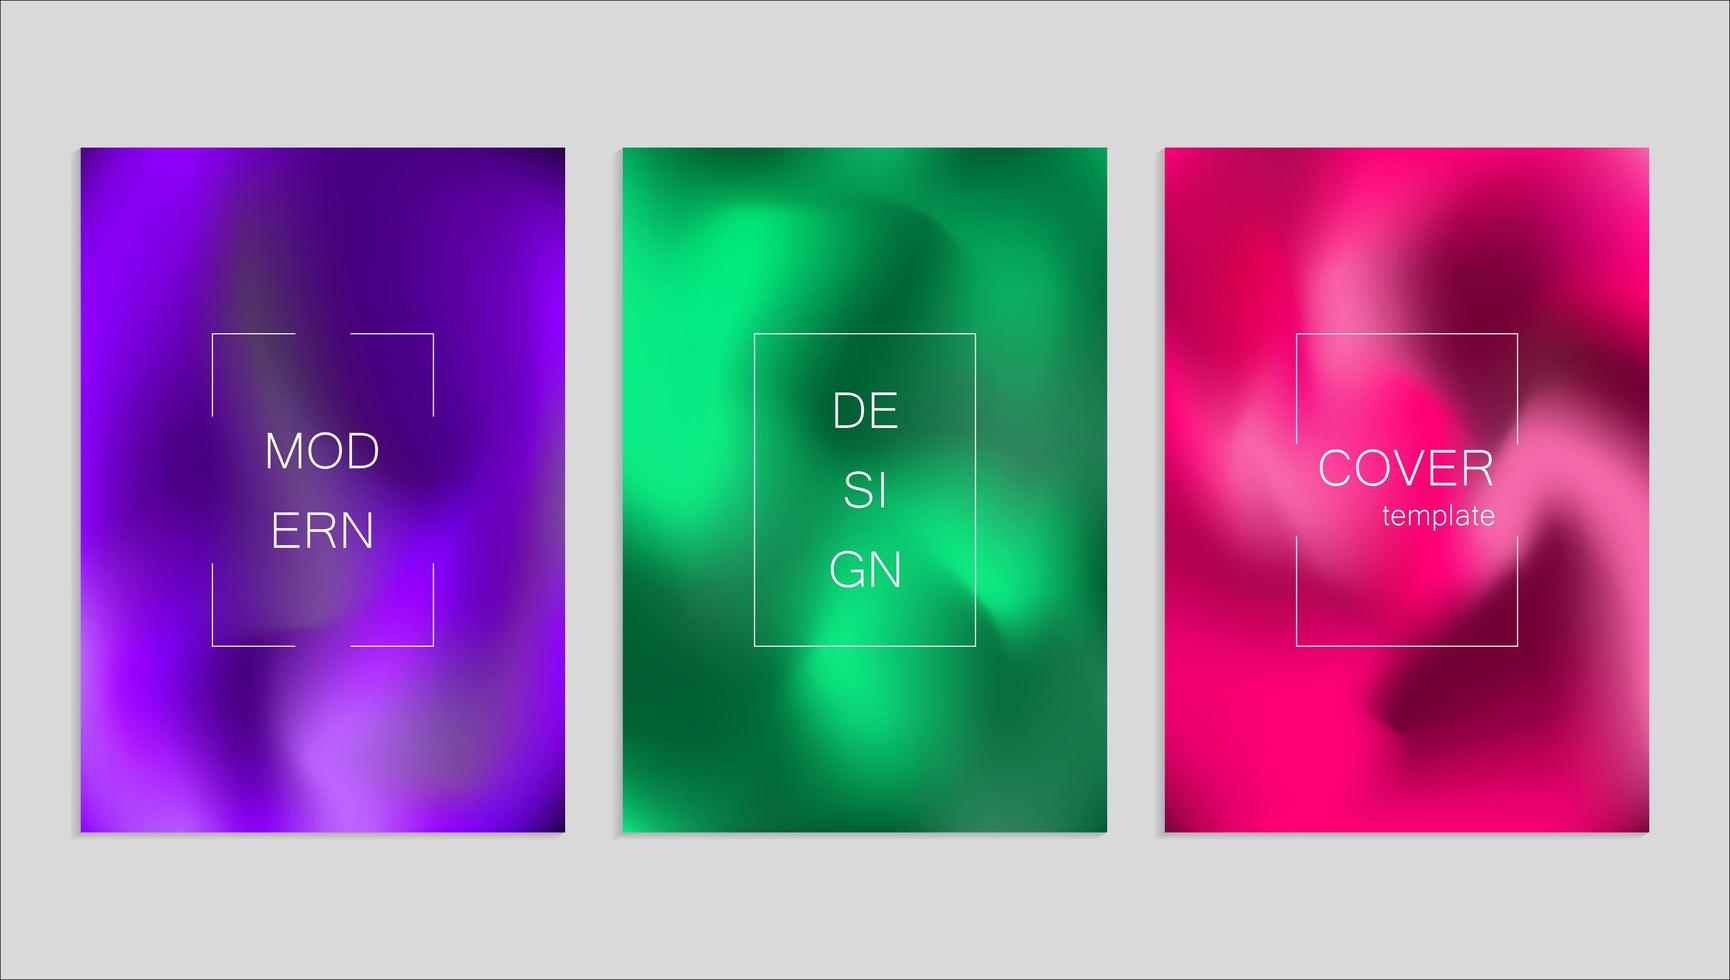 Minimal abstract vector fuid cover design template. Holography gradient background. Vector templates for placards, banners, flyers, presentations and reports